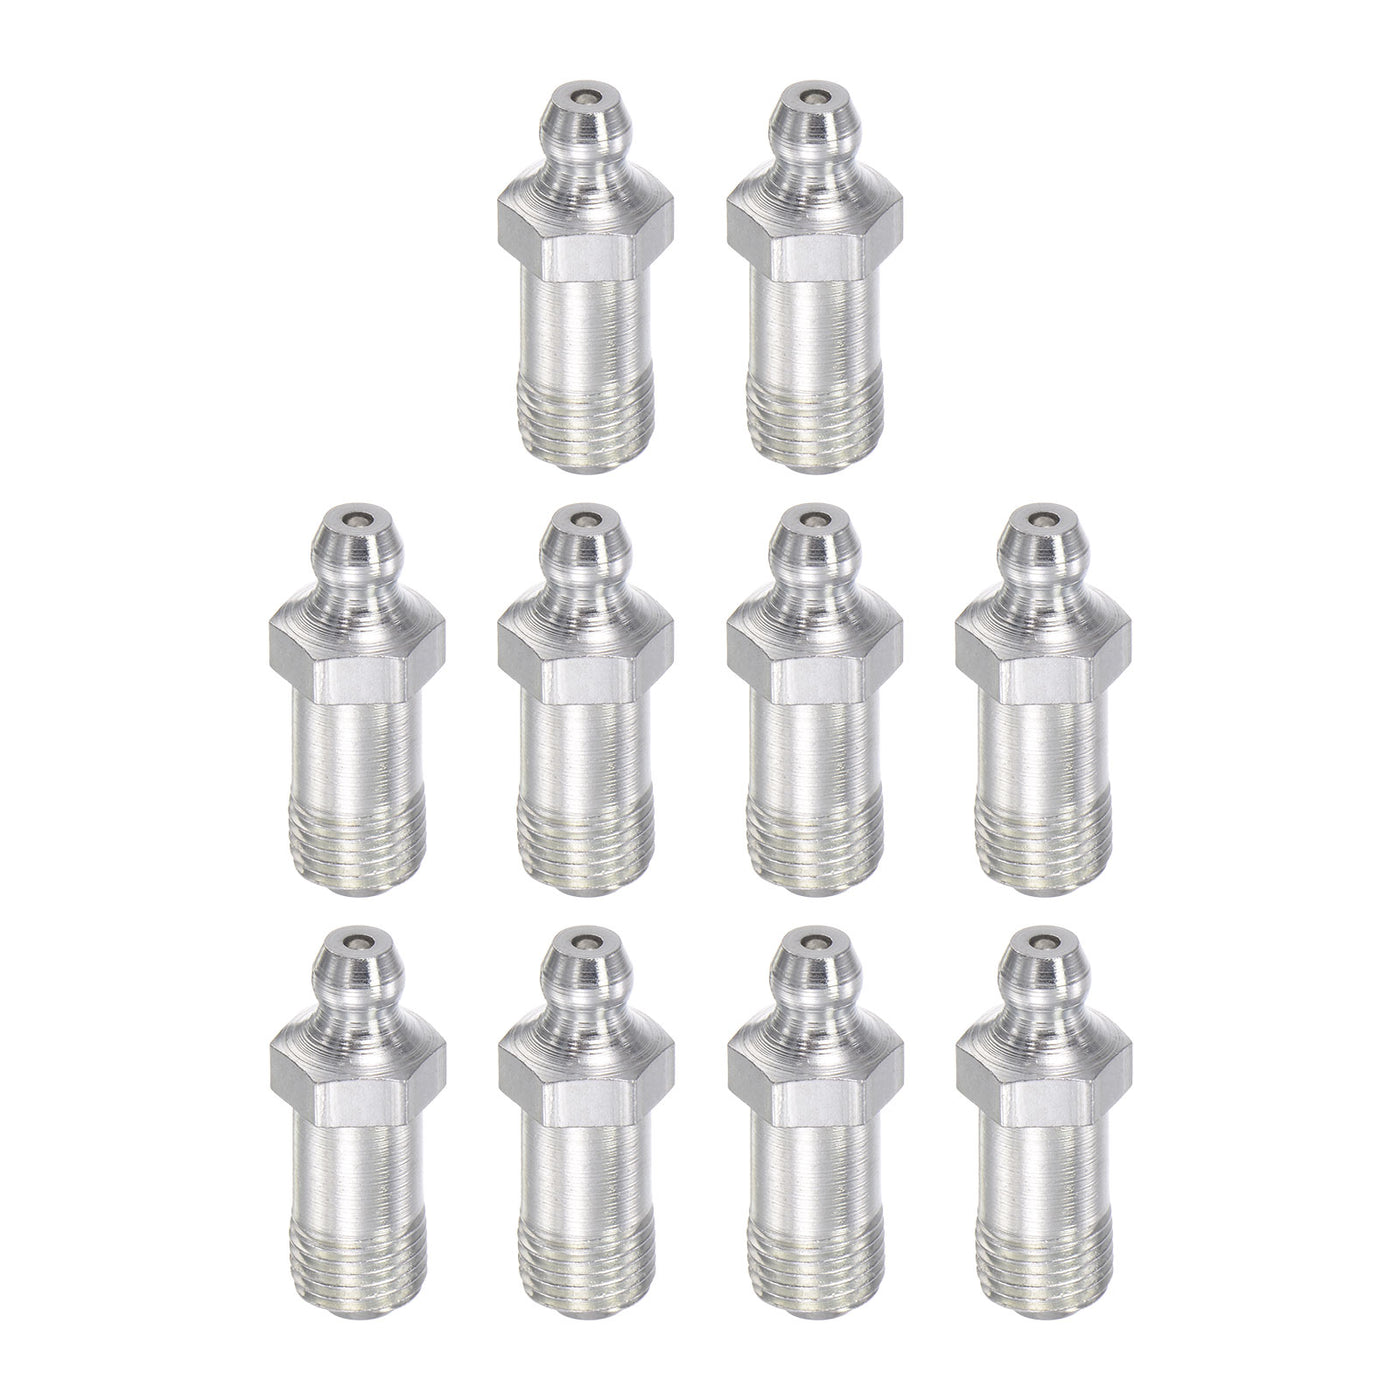 Uxcell Uxcell Steel Straight Hydraulic Grease Fitting Accessories M6 x 1mm Thread, 10Pcs